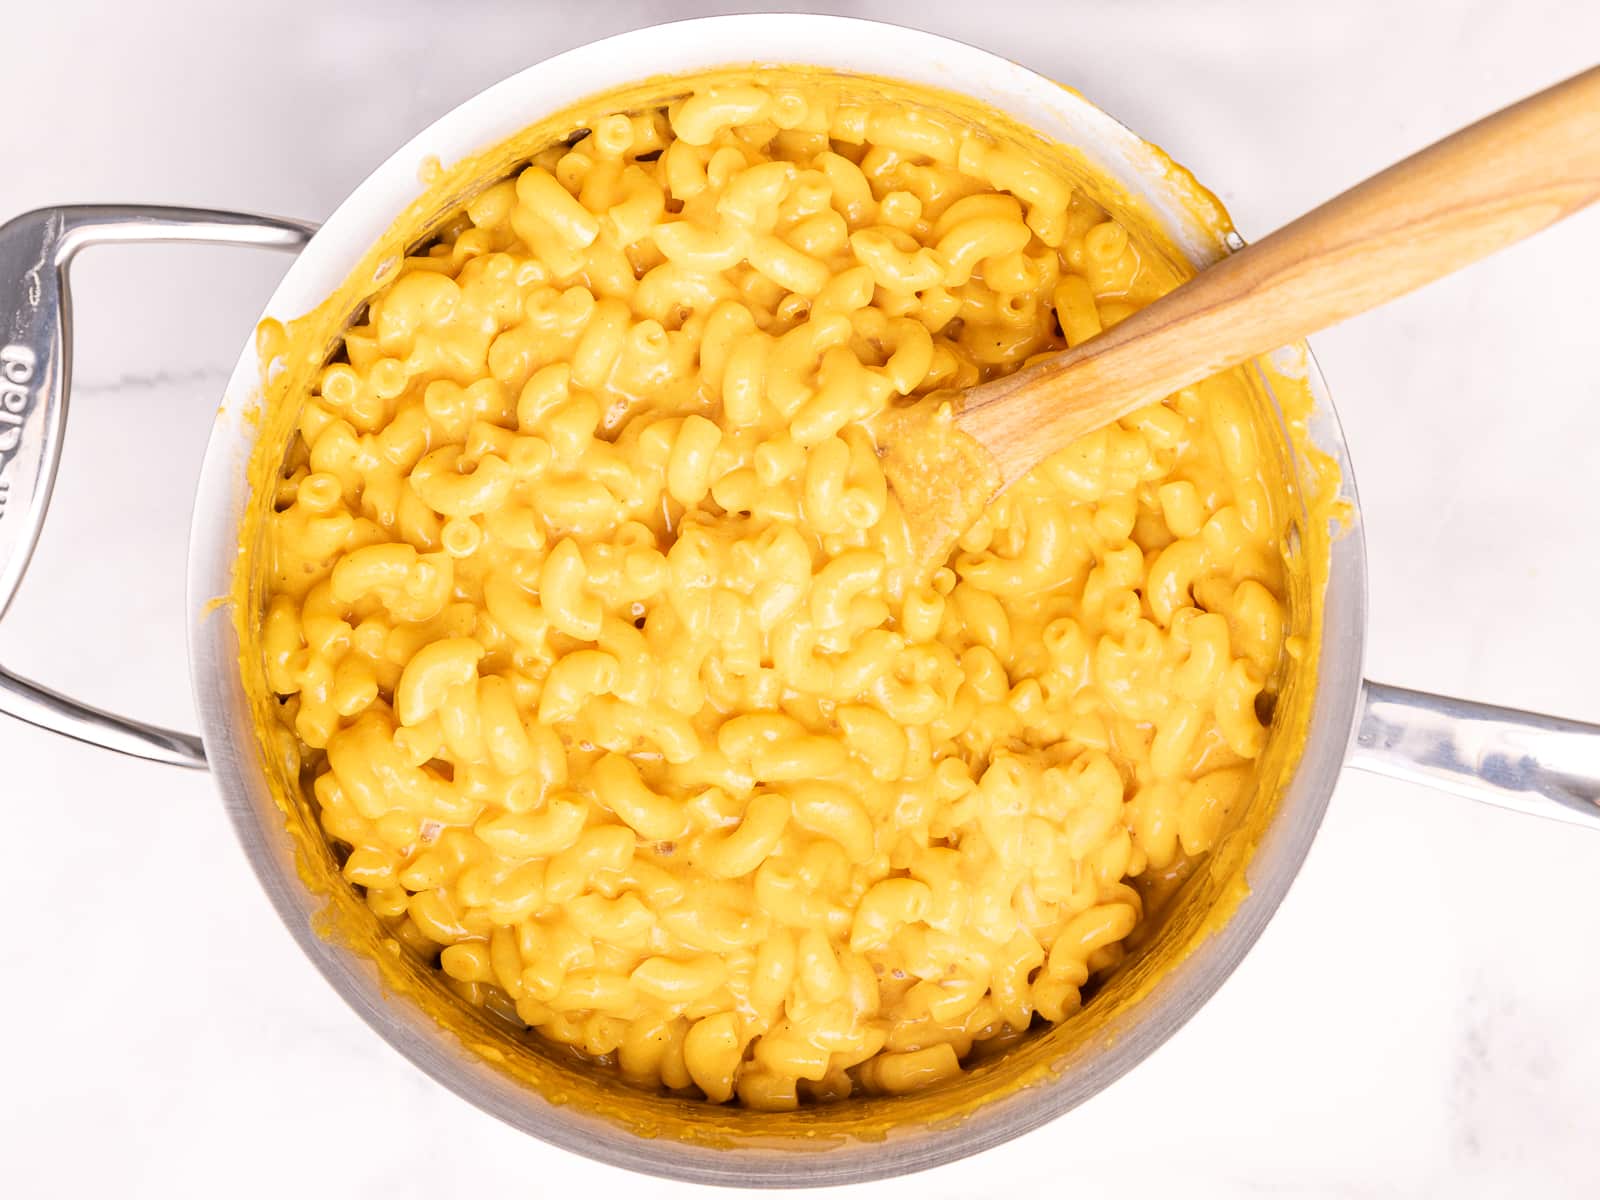 macaroni tossed in cheese sauce